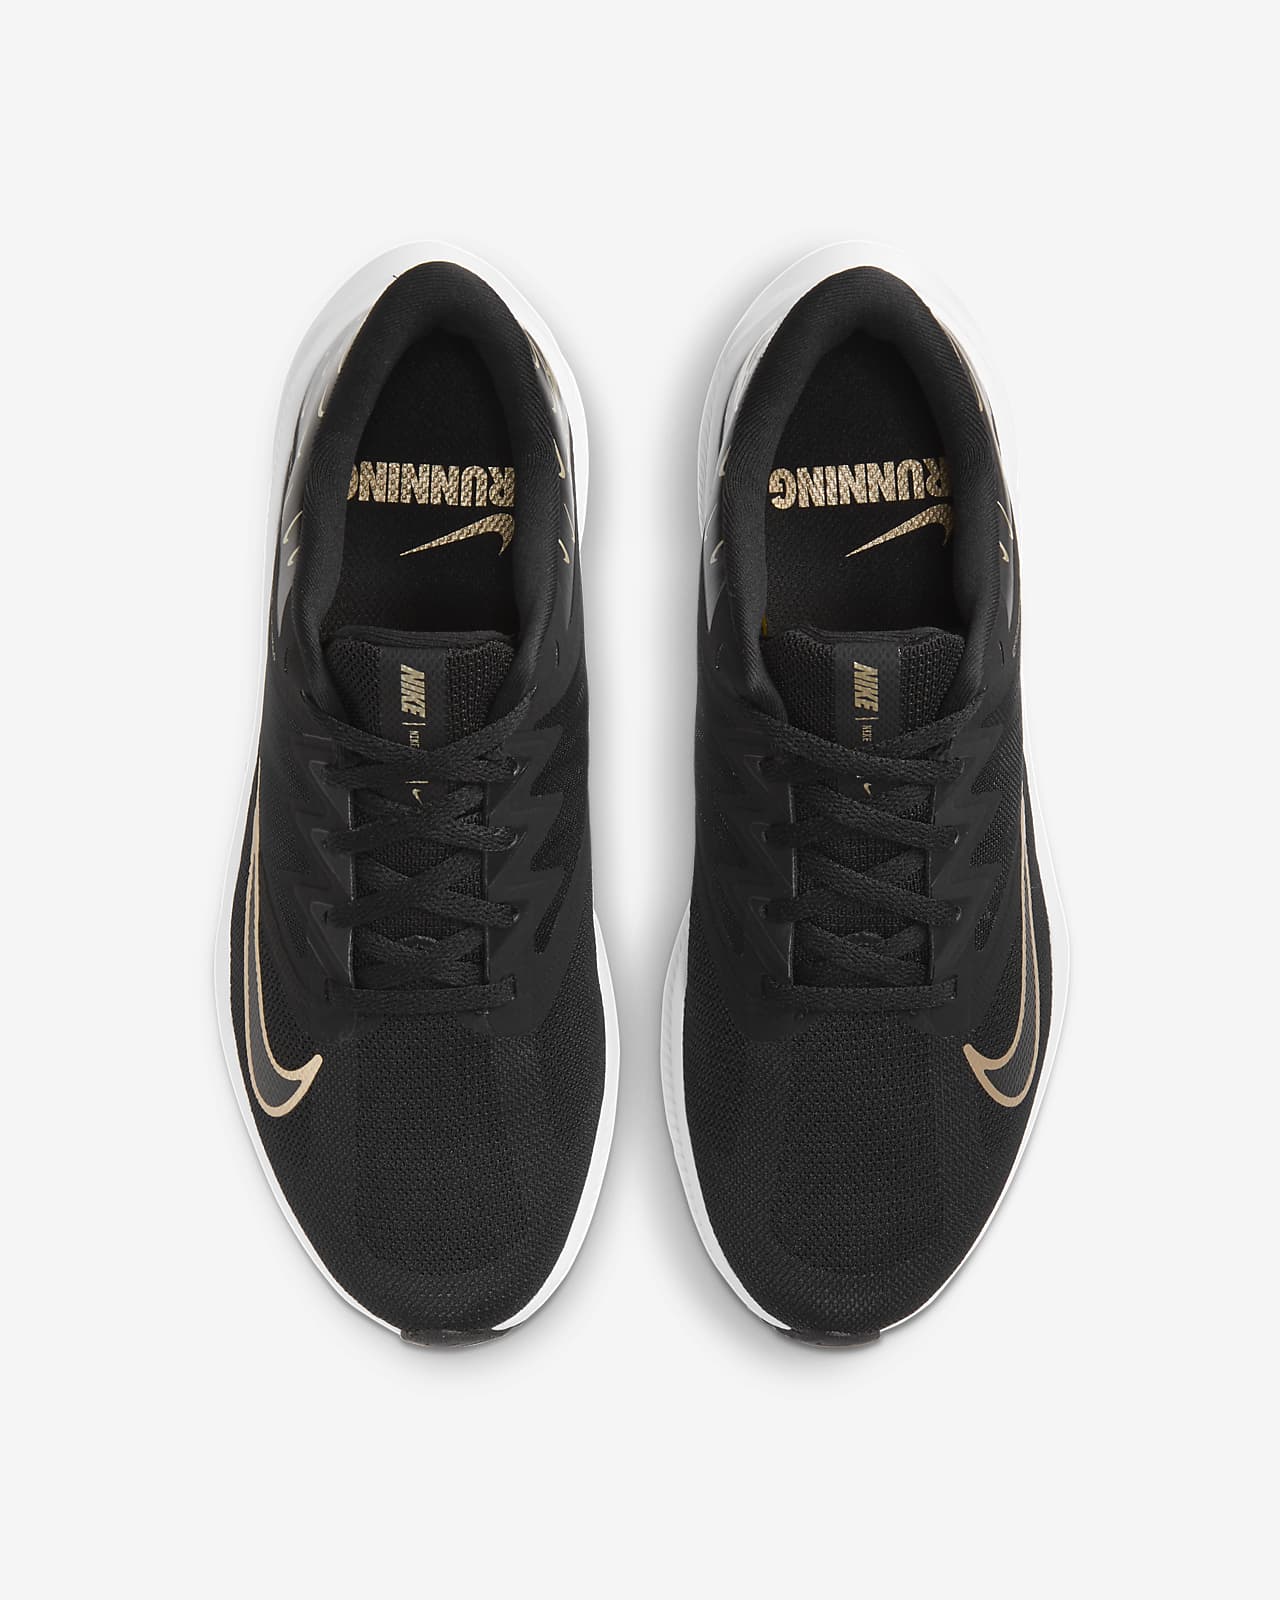 black and gold nike shoes womens